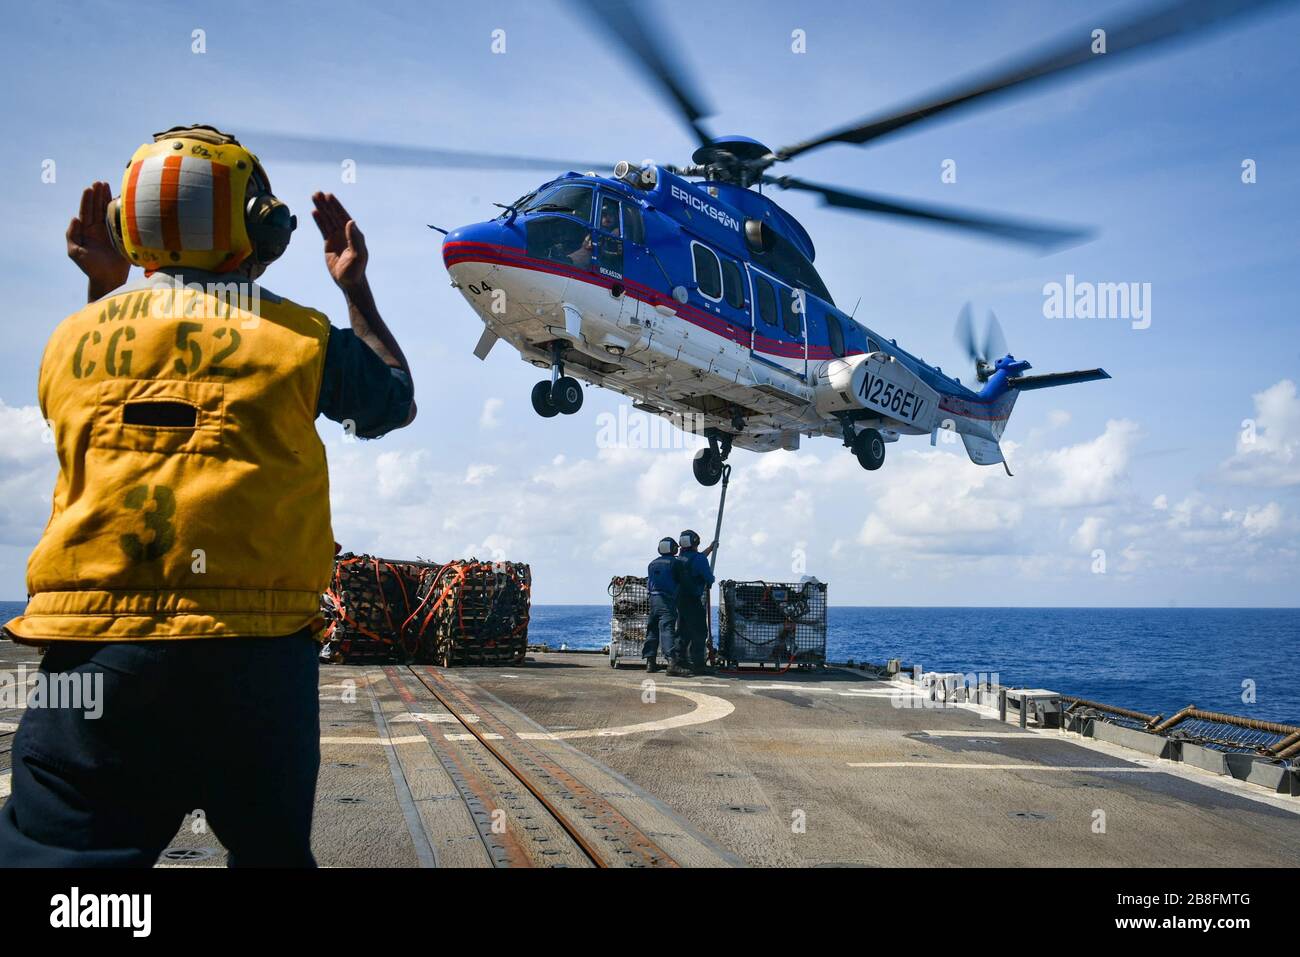 SOUTH CHINA SEA (March 14, 2020) U.S. Navy Boatswain’s Mate 2nd Class Joel Lazo, from San Jose, Calif., left, signals the pilot of a Eurocopter AS332 Superpuma, assigned to the dry cargo and ammunition ship USNS Carl Brashear (T-AKE 7),  while U.S. Navy Seaman Oluwatobiloba Kosoko, from Lagos, Nigeria, and U.S. Navy Seaman Noah Rodenburg, from St. Louis, attach a cargo leg during a vertical replenishment-at-sea aboard the Ticonderoga-class guided-missile cruiser USS Bunker Hill (CG 52) March 14, 2020. Bunker Hill, part of the Theodore Roosevelt Carrier Strike Group, is on a scheduled deploymen Stock Photo